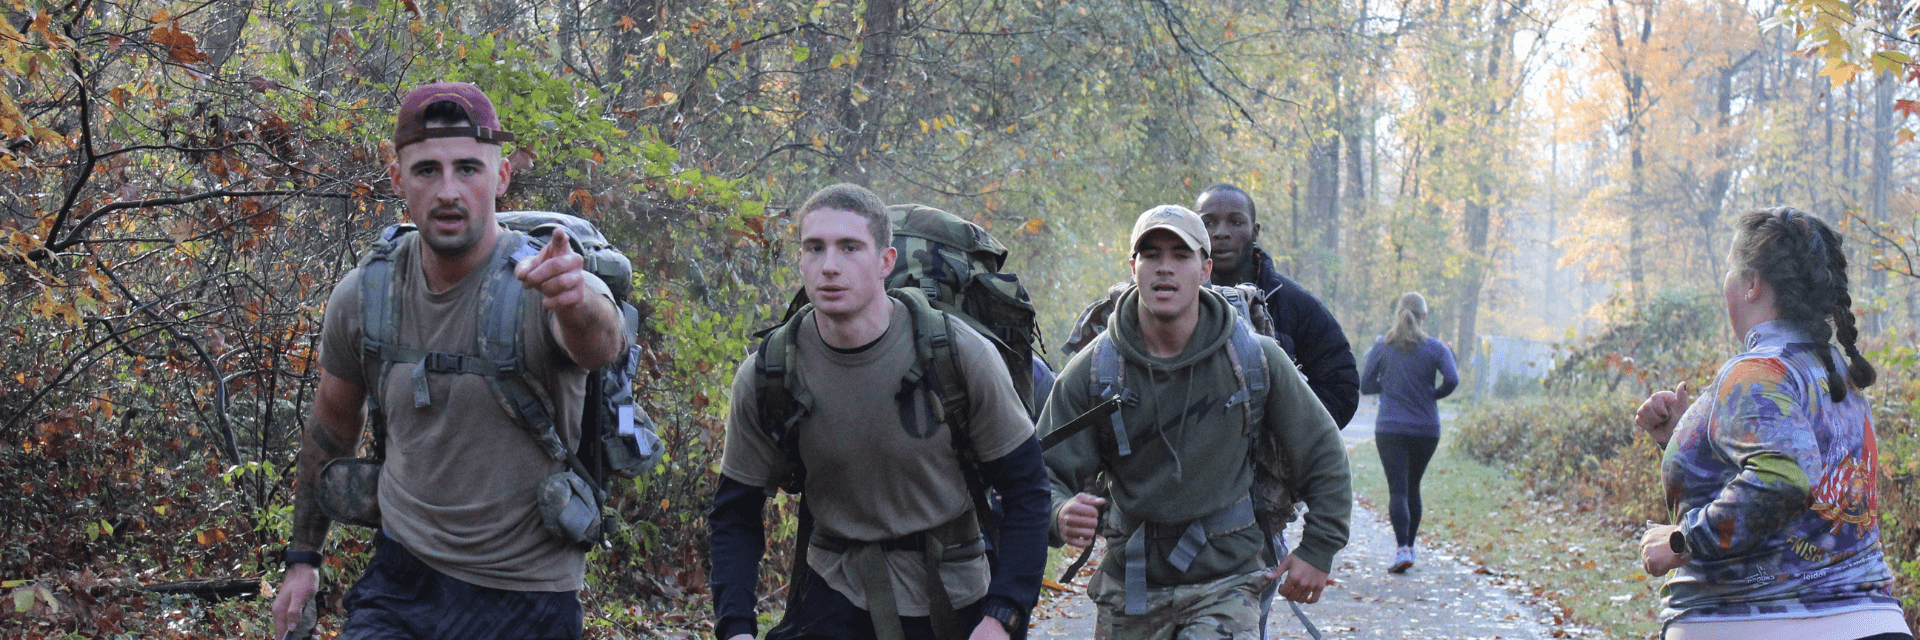 cadets on trail